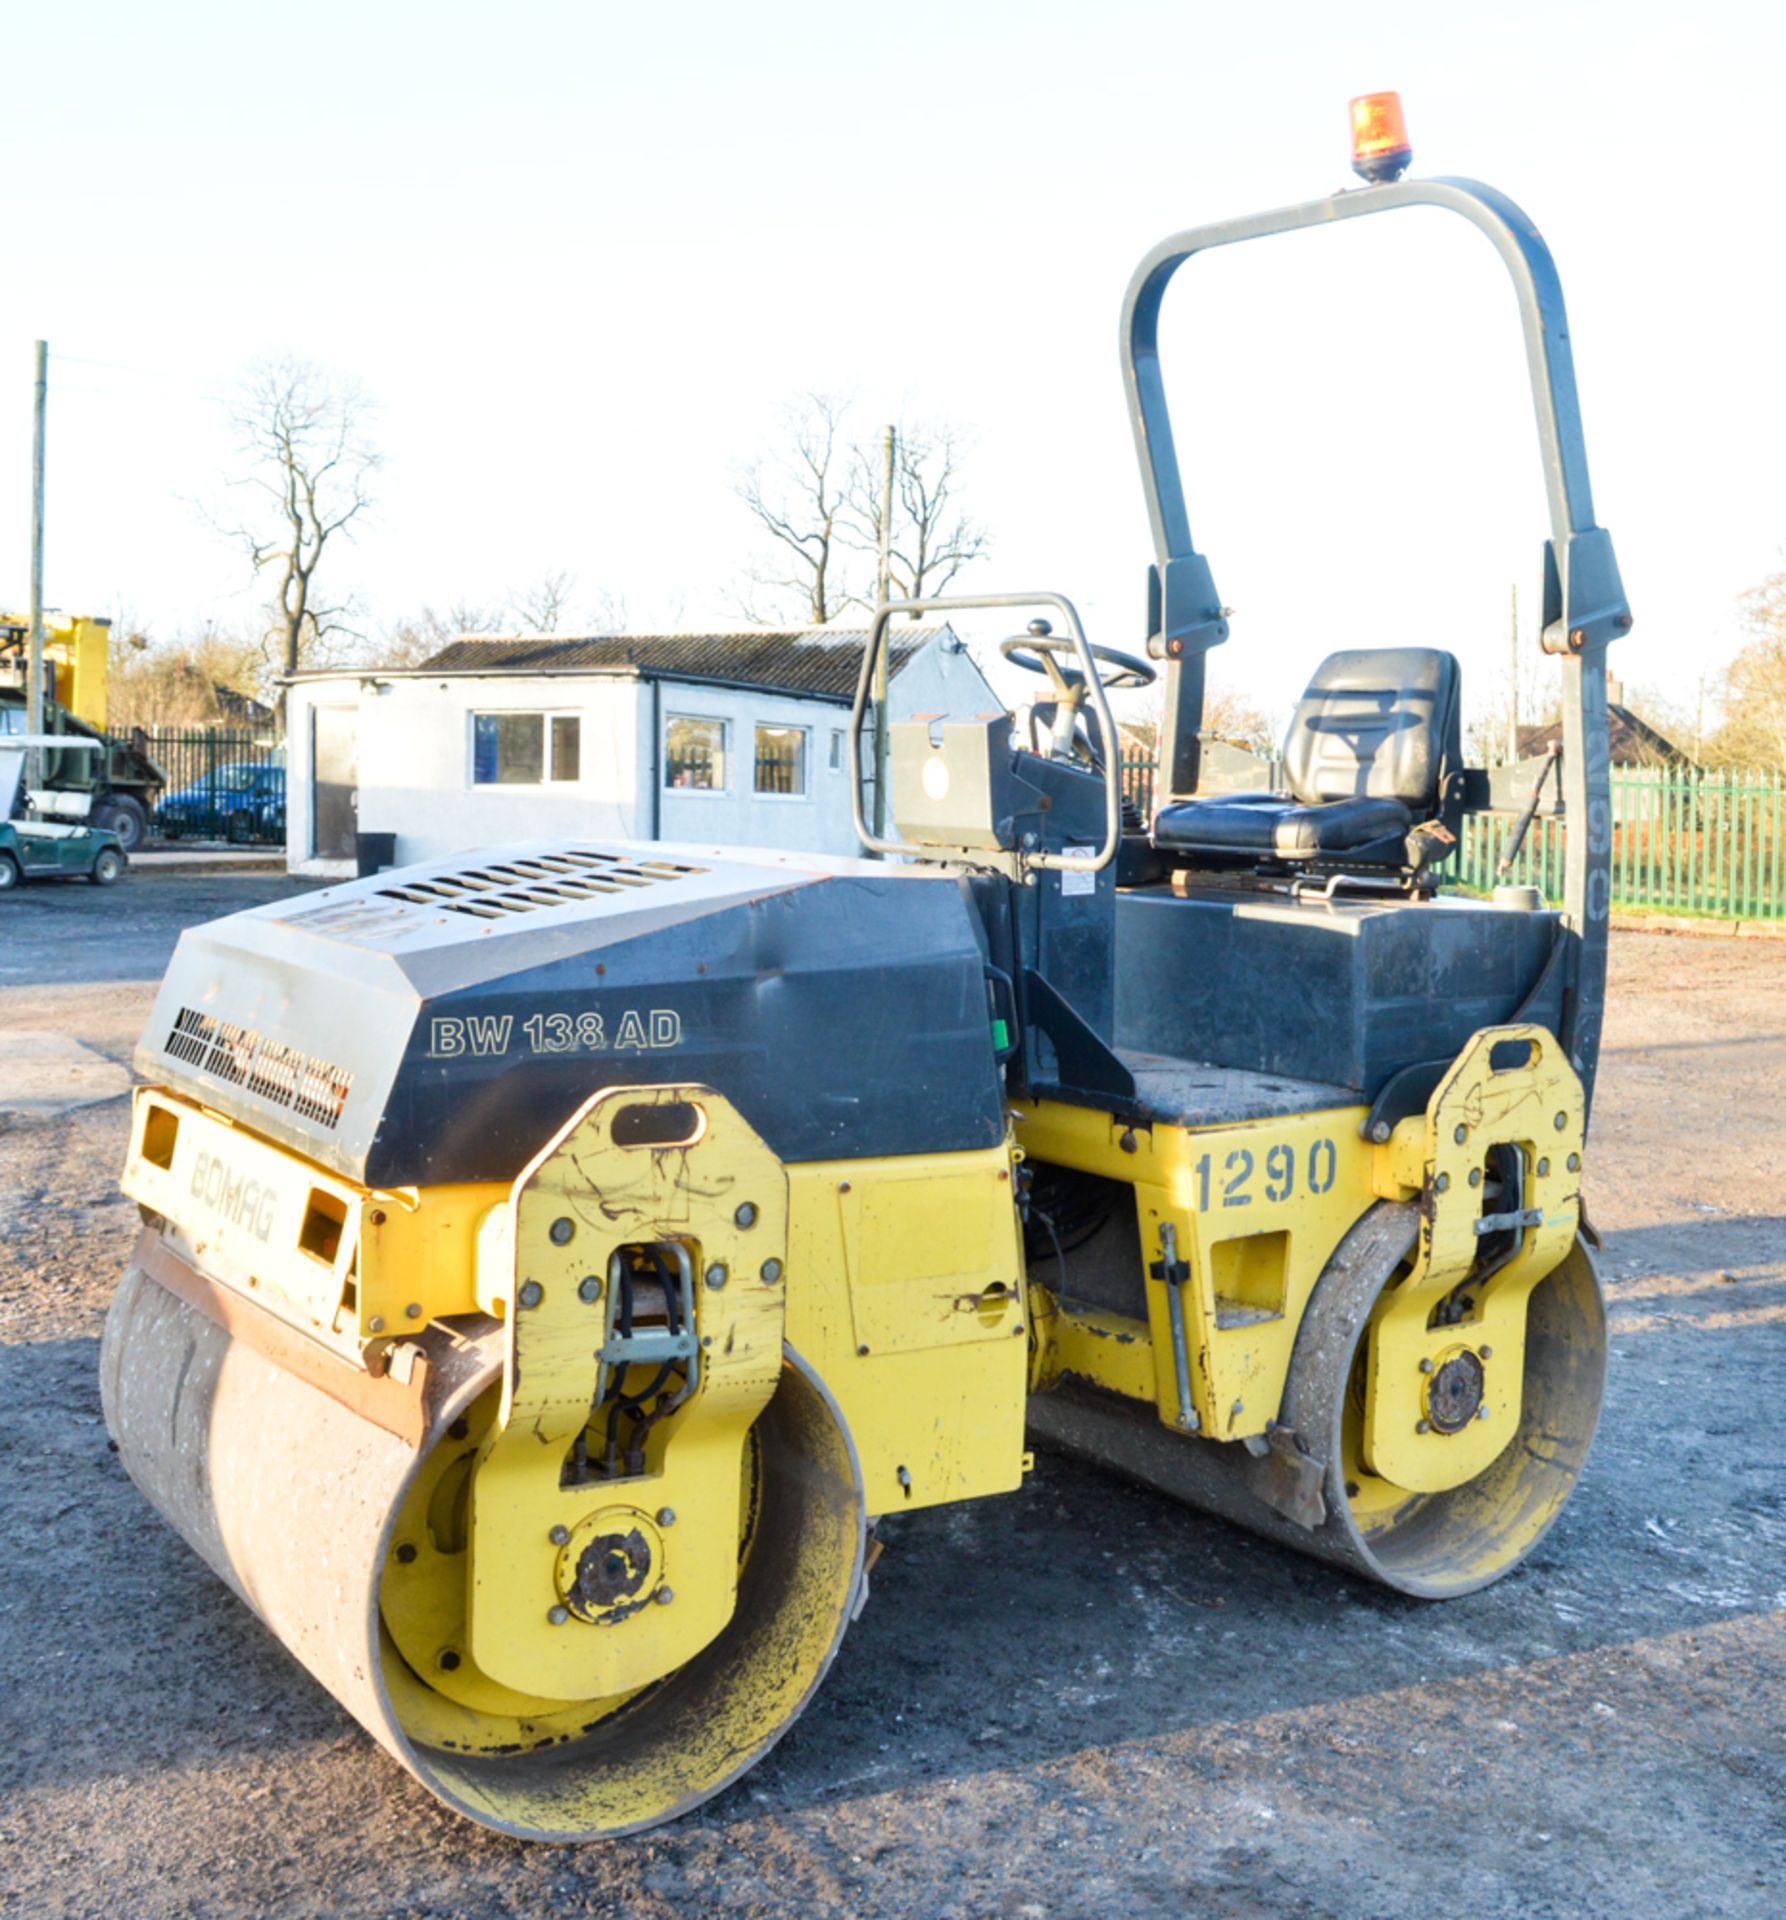 Bomag BW138AD double drum ride on roller Year: 2005 S/N: 42234 Recorded Hours: 749 1290 - Image 4 of 7